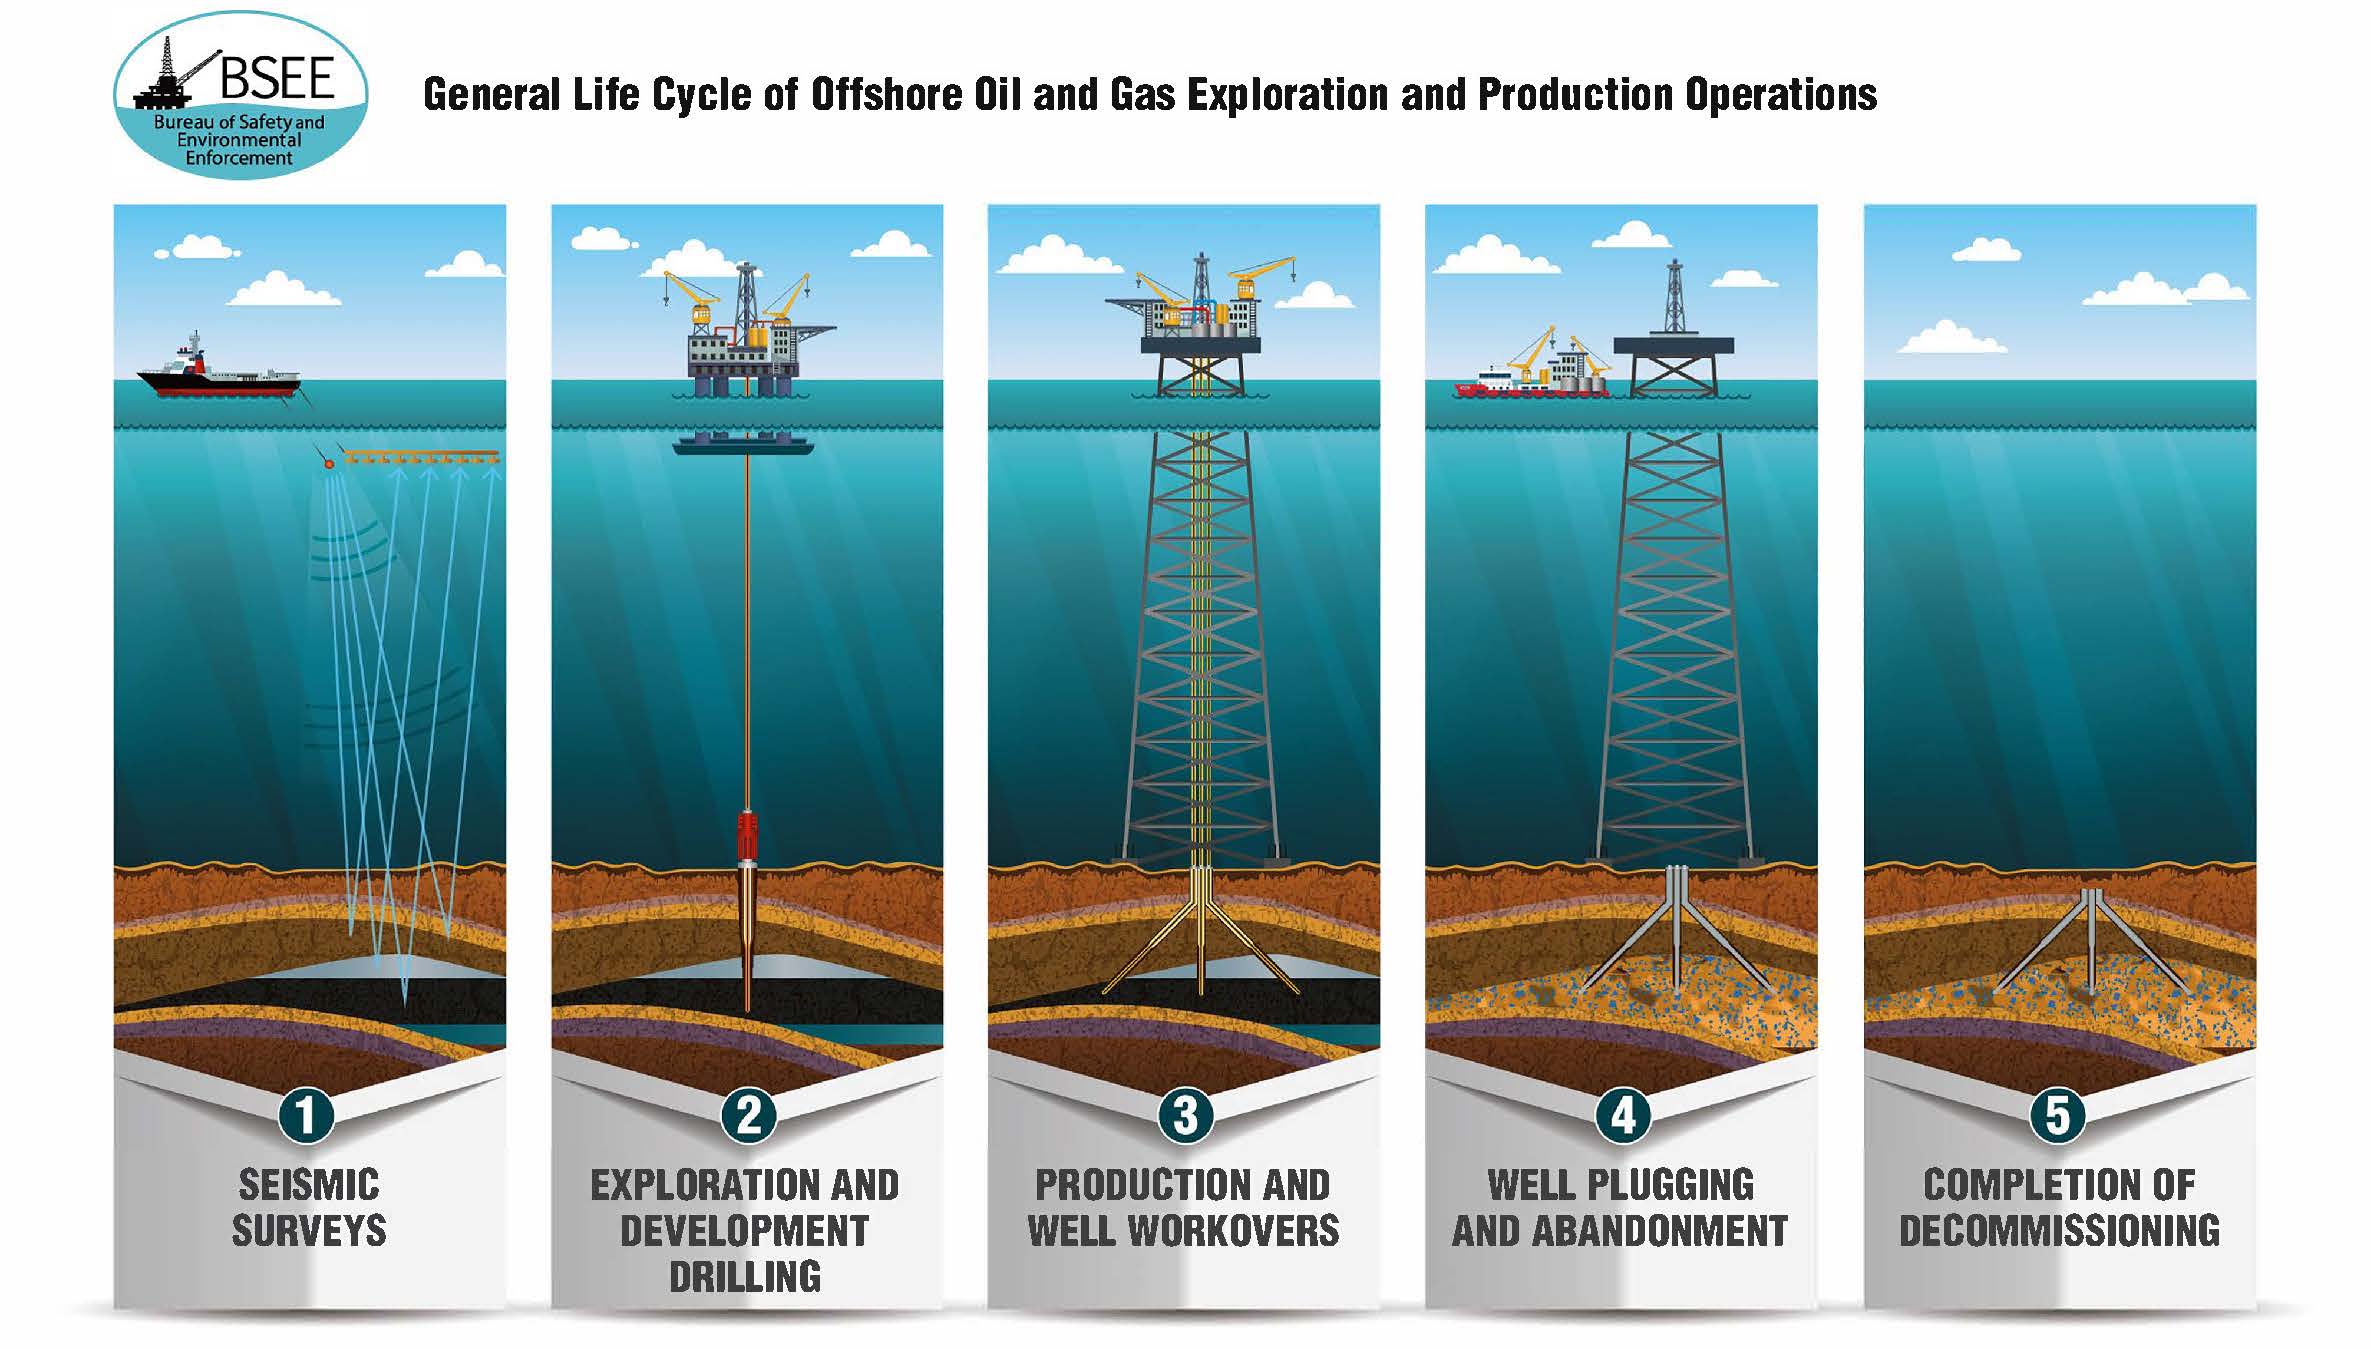 BSEE Lifecycle of Oil and Gas Offshore Exploration